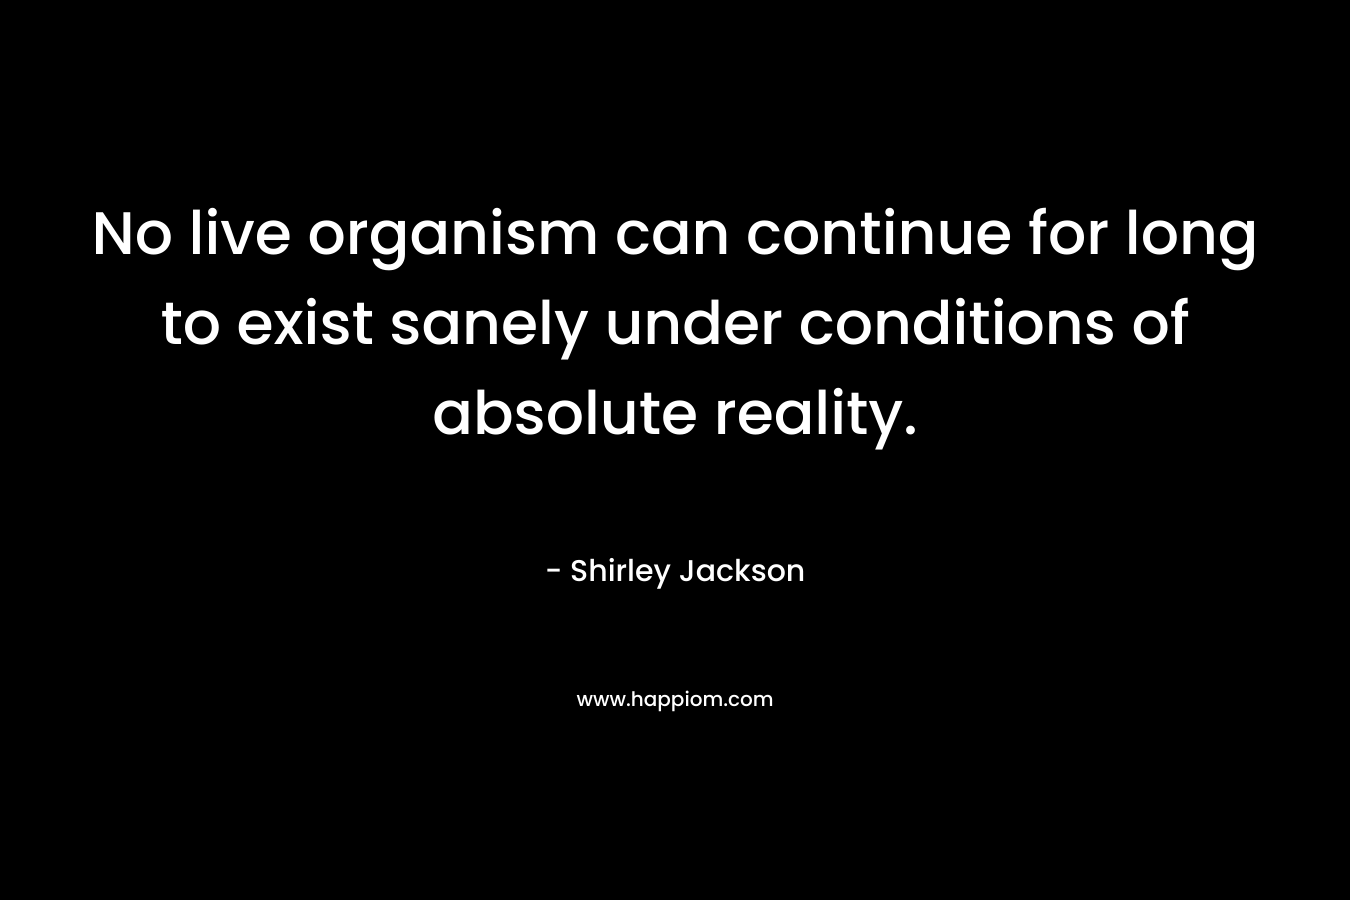 No live organism can continue for long to exist sanely under conditions of absolute reality. – Shirley Jackson